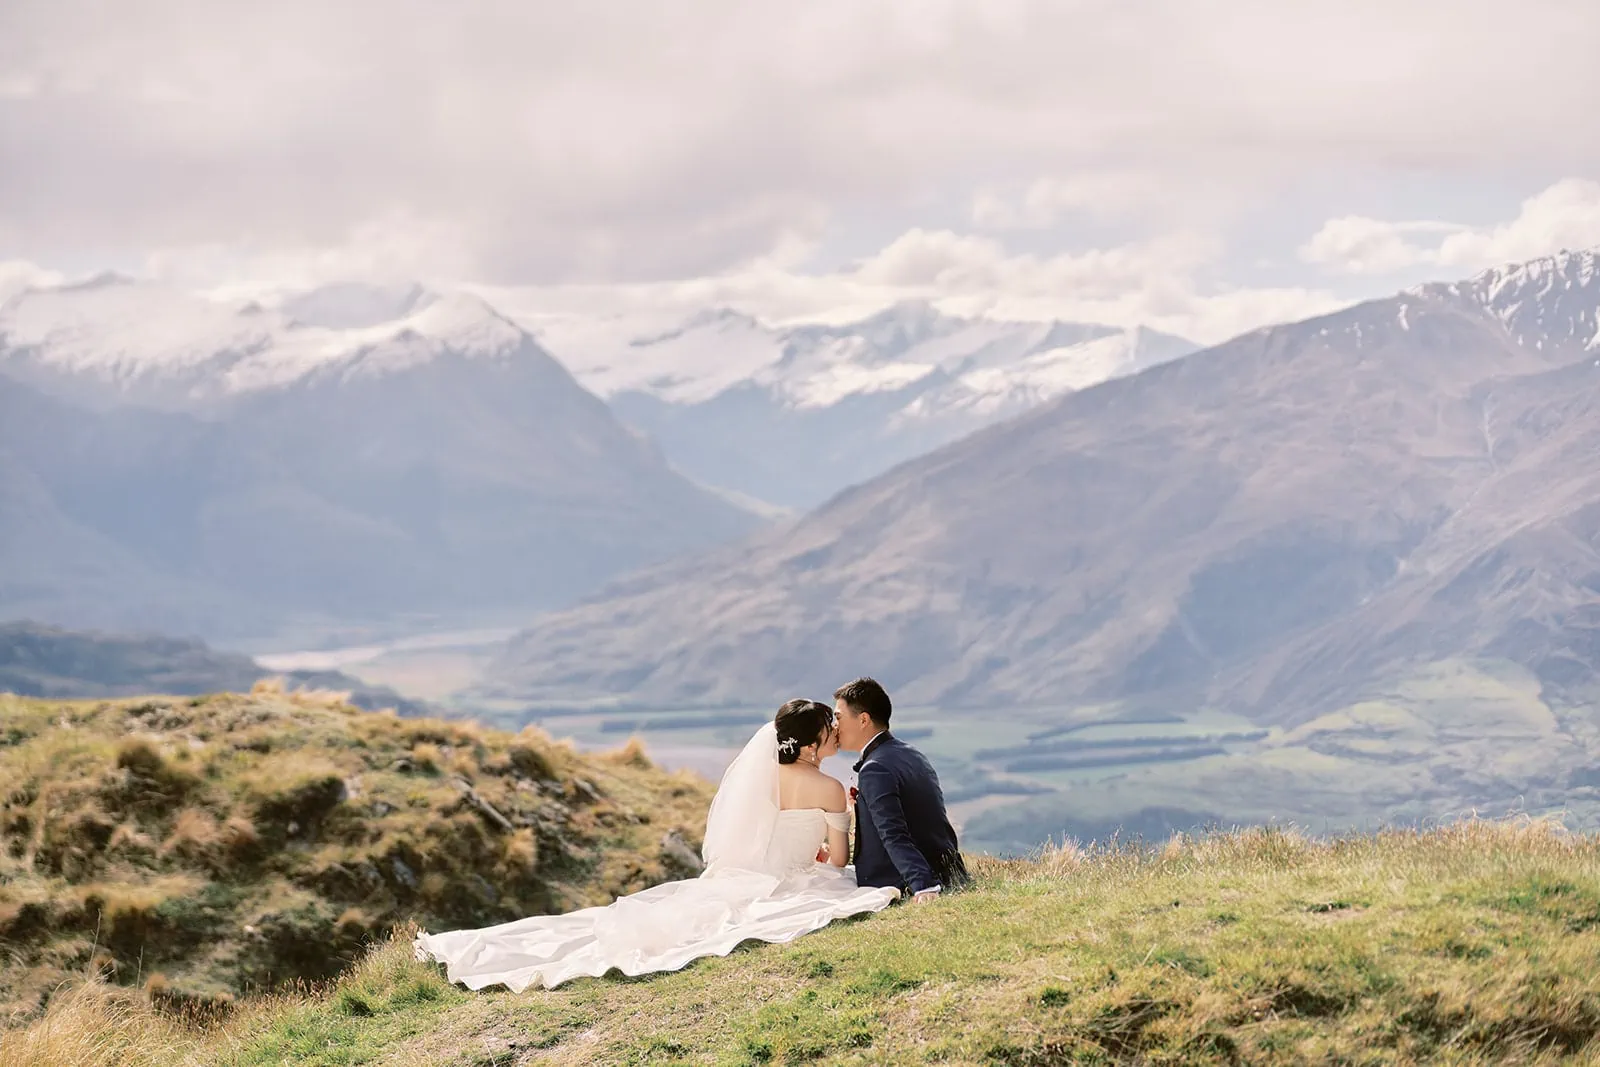 Queenstown Elopement Heli Wedding Photographer クイーンズタウン結婚式 | A couple sitting on a hill overlooking the mountains in New Zealand during their pre-wedding photoshoot.